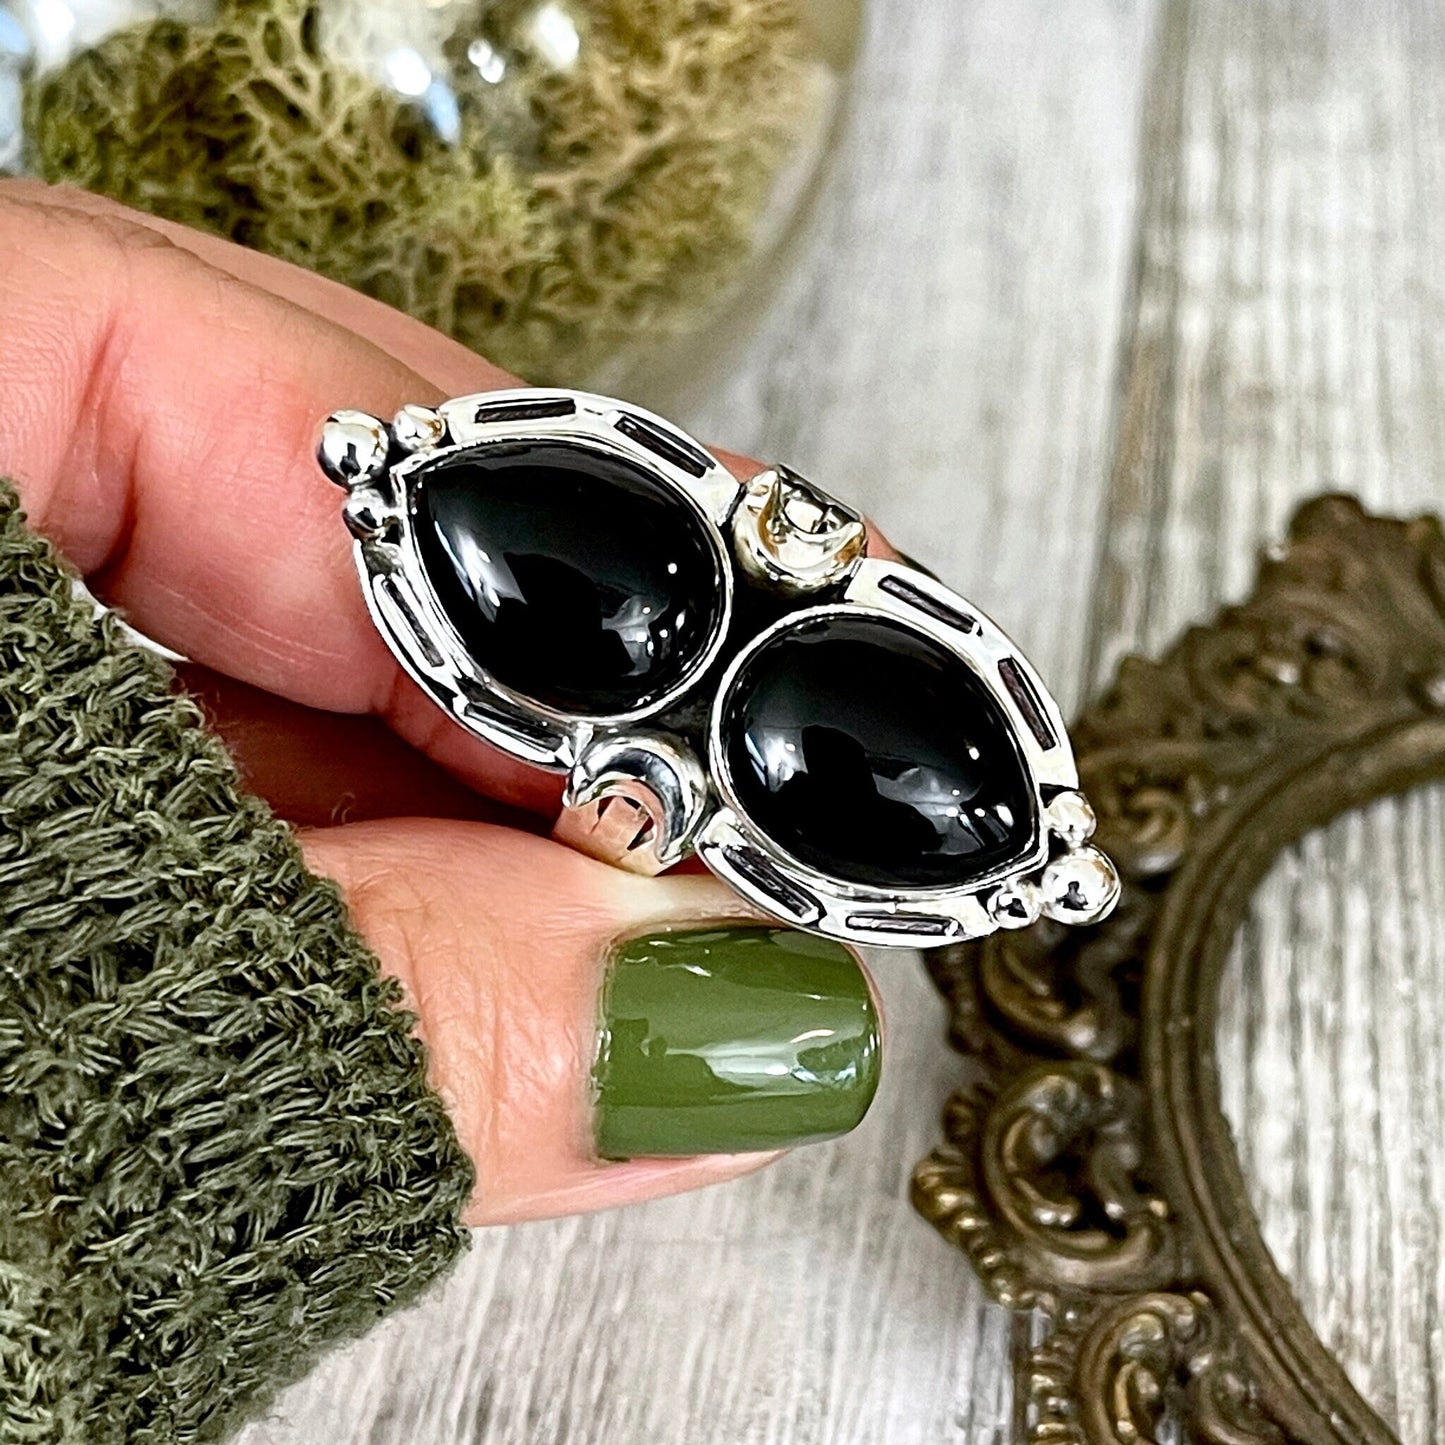 Mystic Moons Black Onyx Crystal Ring in Solid Sterling Silver- Designed by FOXLARK Collection Size 6 7 8 9 10 / Gothic Jewelry